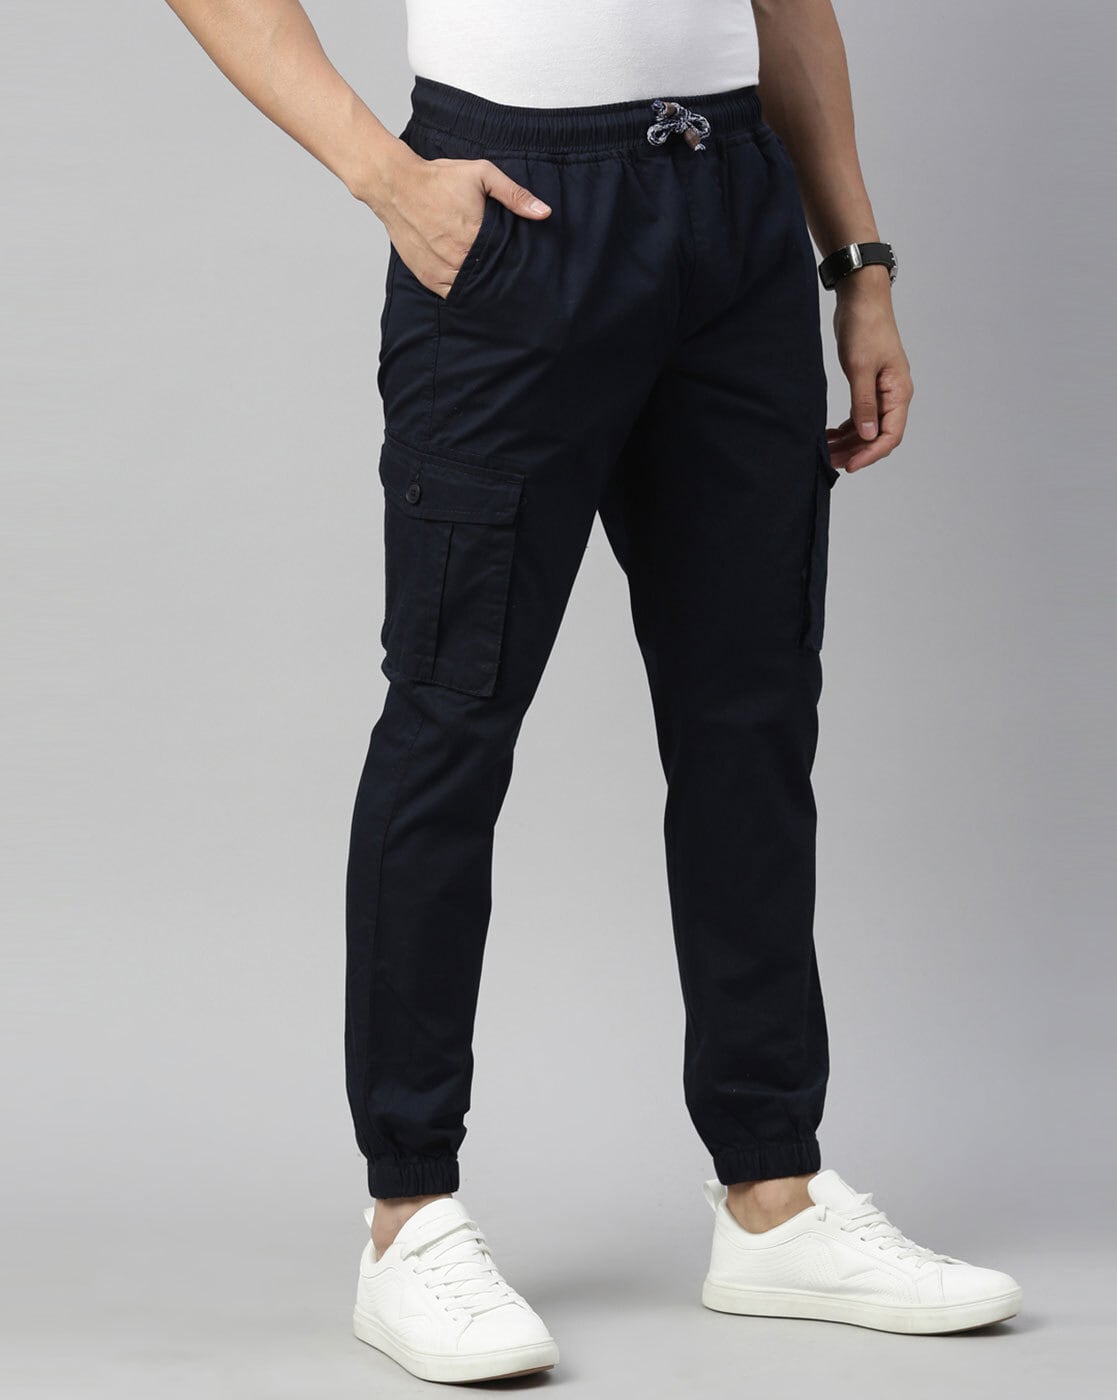 Mens Outfit with Jogger Pants 30 Ways to Wear Jogger Pants